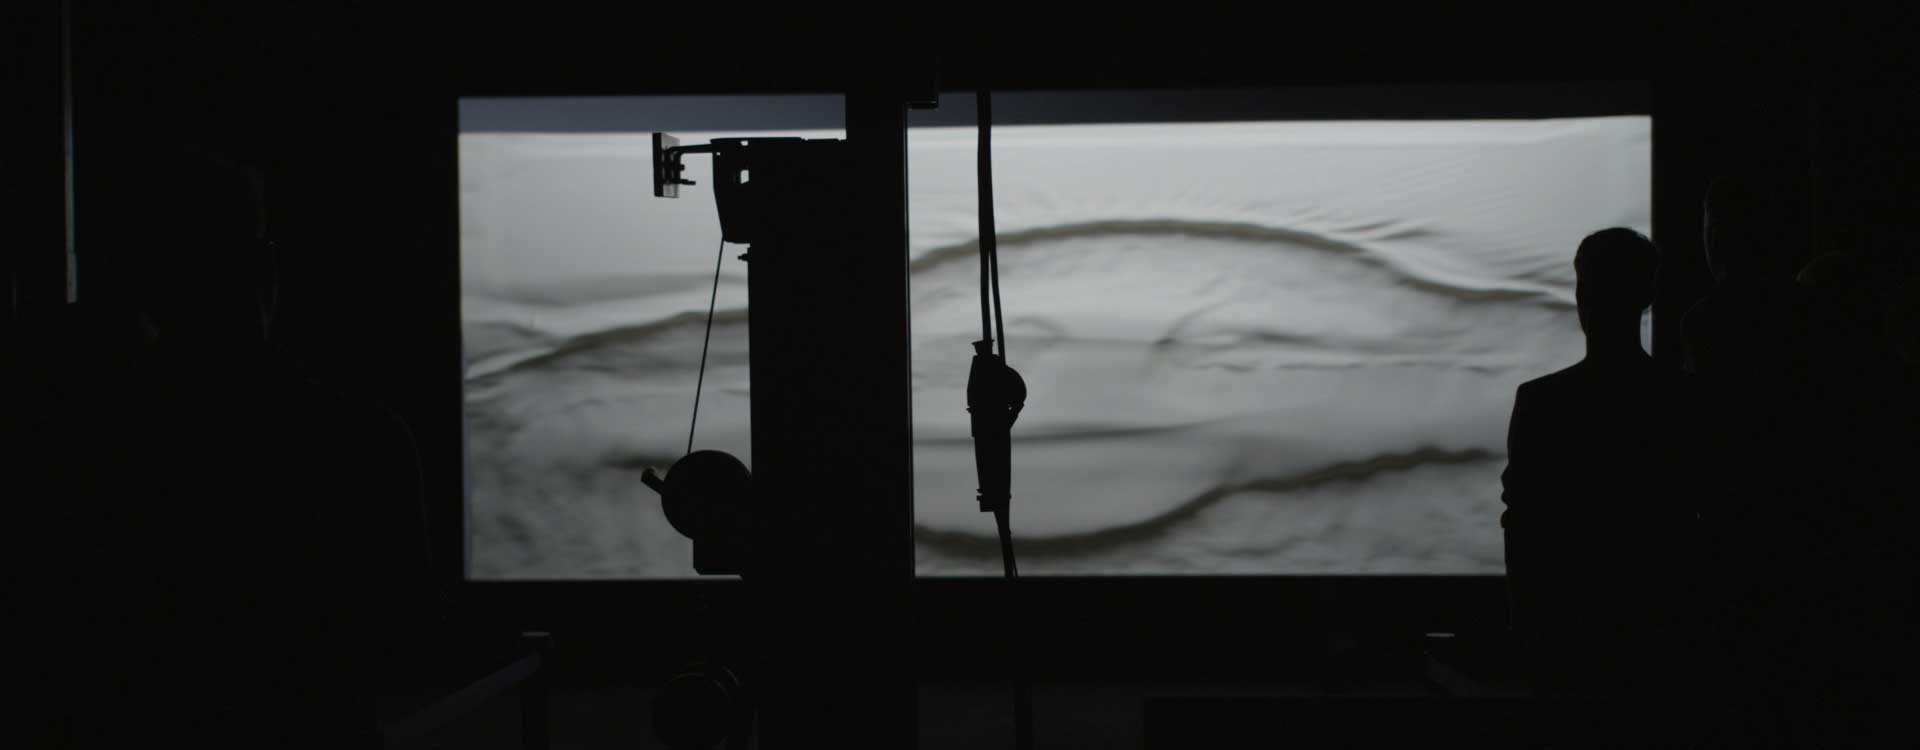 Silhouette in studio. Still from Mercedes-Benz Commercial.